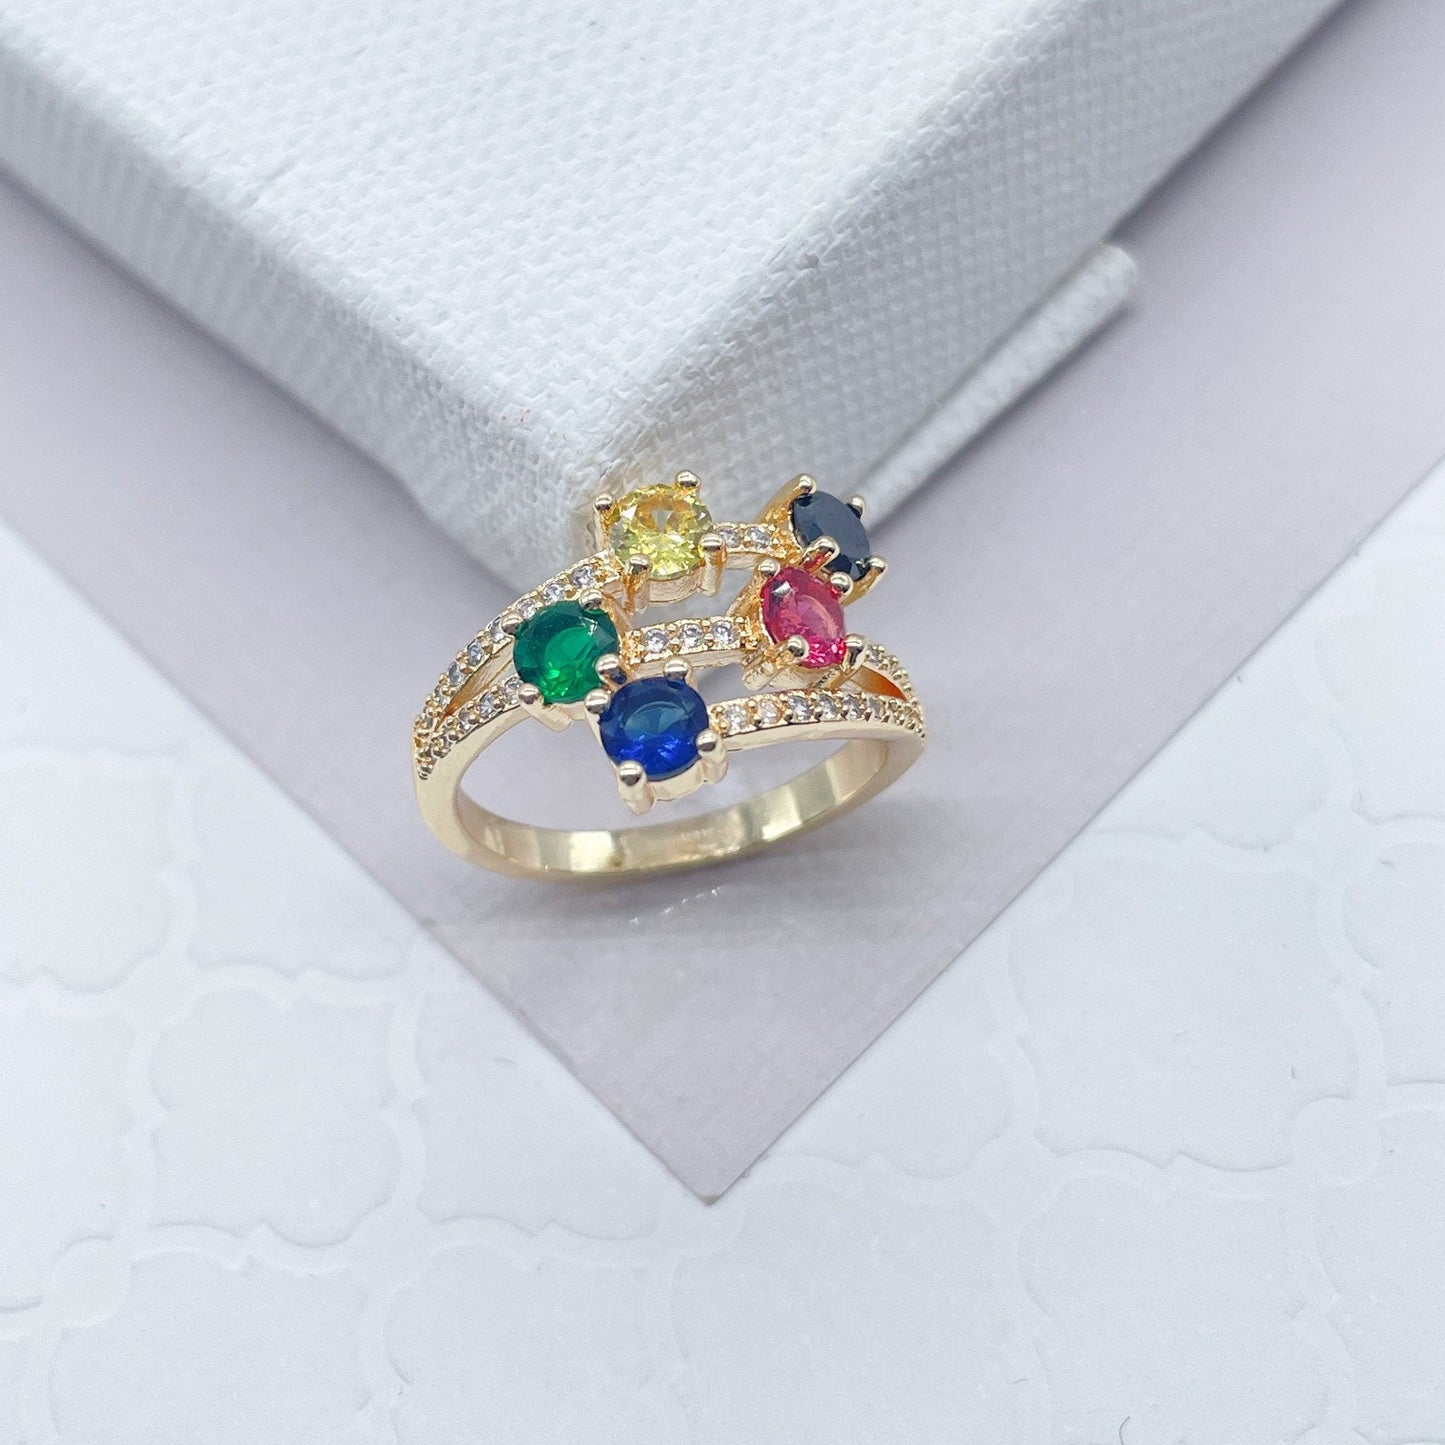 18k Gold Layered with Five Multi Color Cubic Zirconia Stones Ring Details In